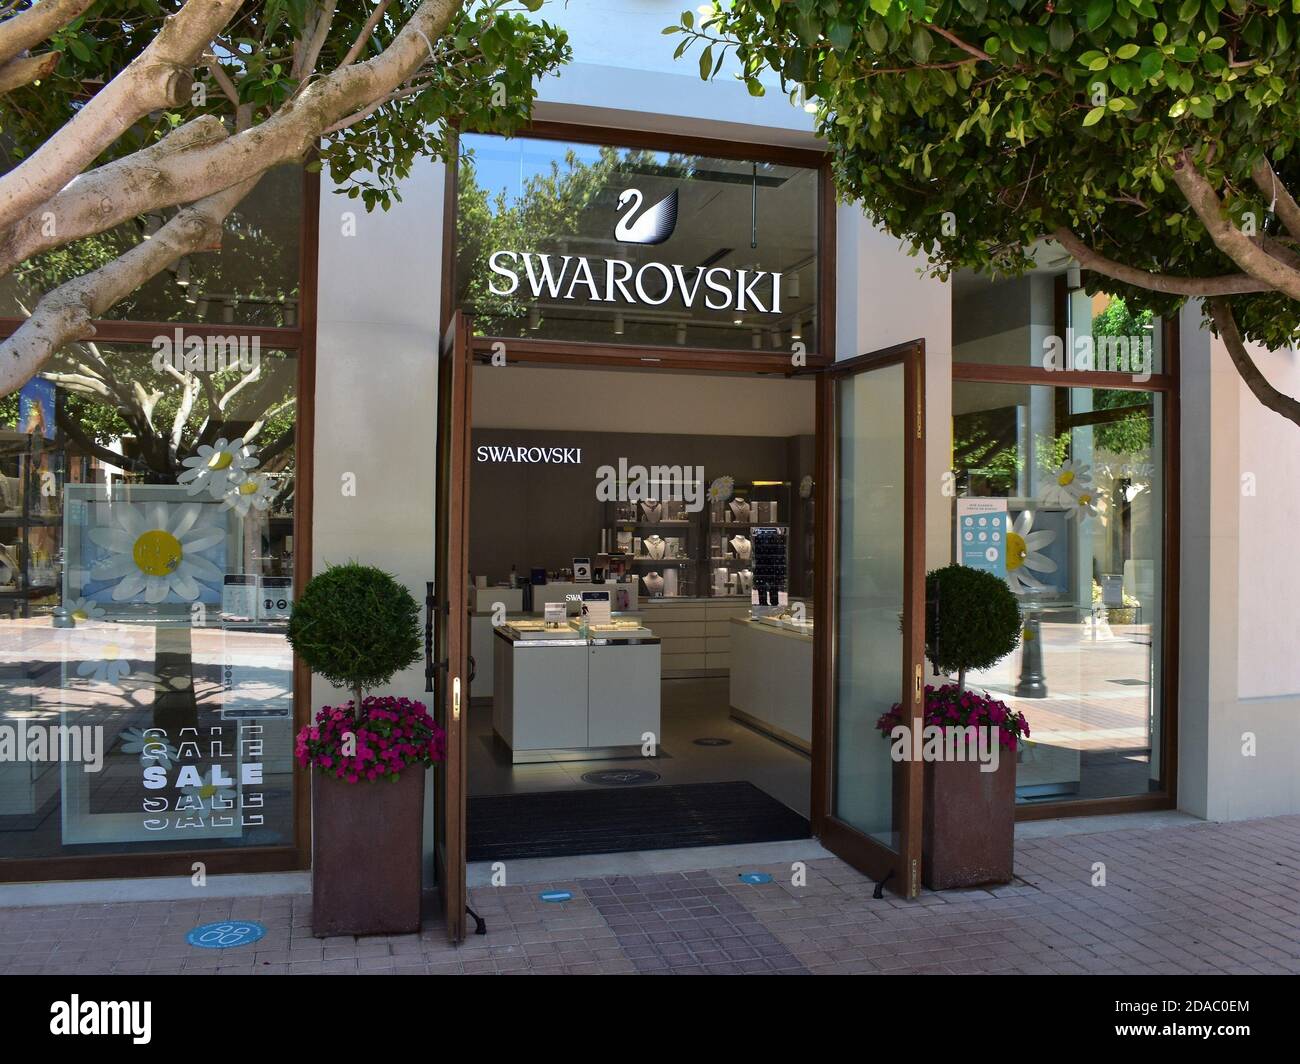 Swarovski Jewelry High Resolution Stock Photography and Images - Alamy